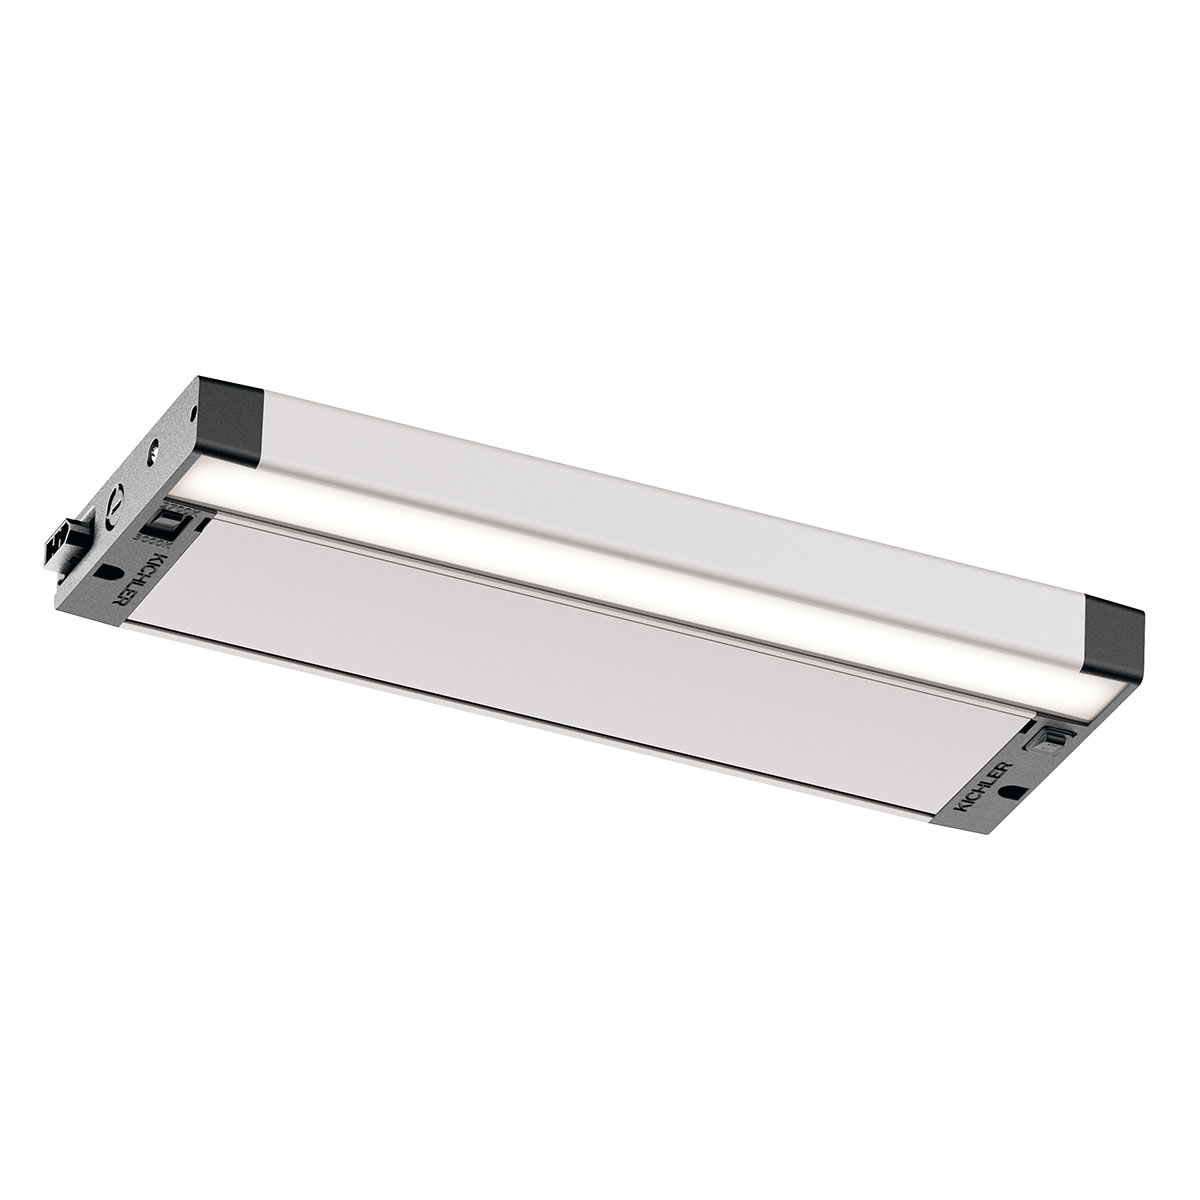 The high quality light output of the 6U Series LED under-cabinet fixture offers a consistently diffused, spot-free lighting effect. The ability to switch the fixture between 2700K and 3000K allows for the ultimate in homeowner customization.